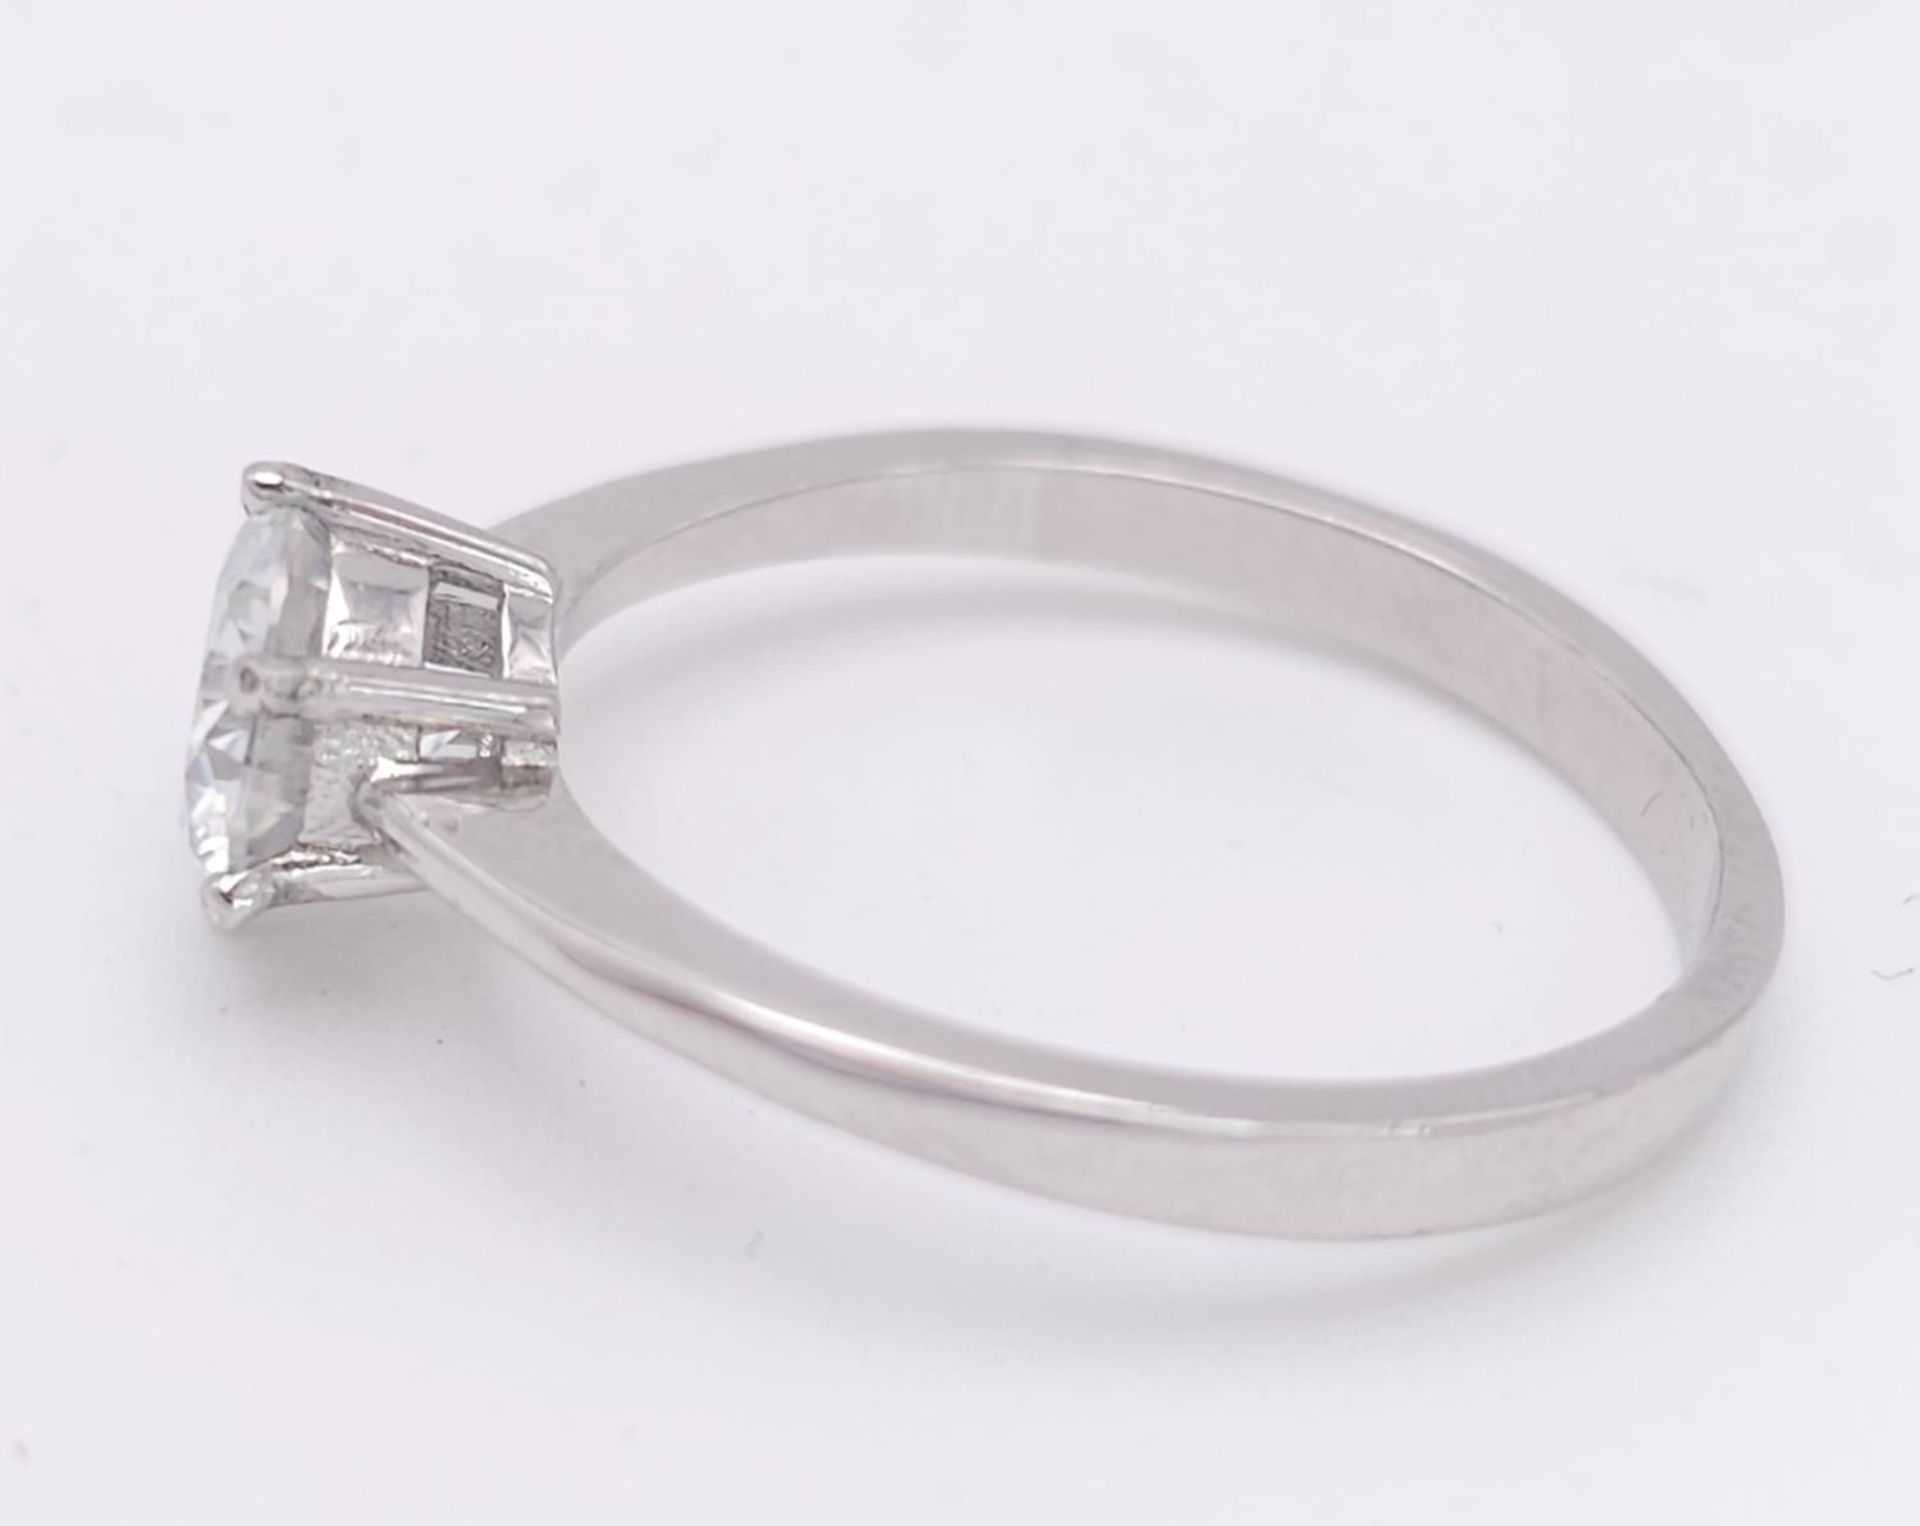 A 1ct Moissanite 925 Silver Ring. Size N. Comes with a GRA certificate. - Image 3 of 7